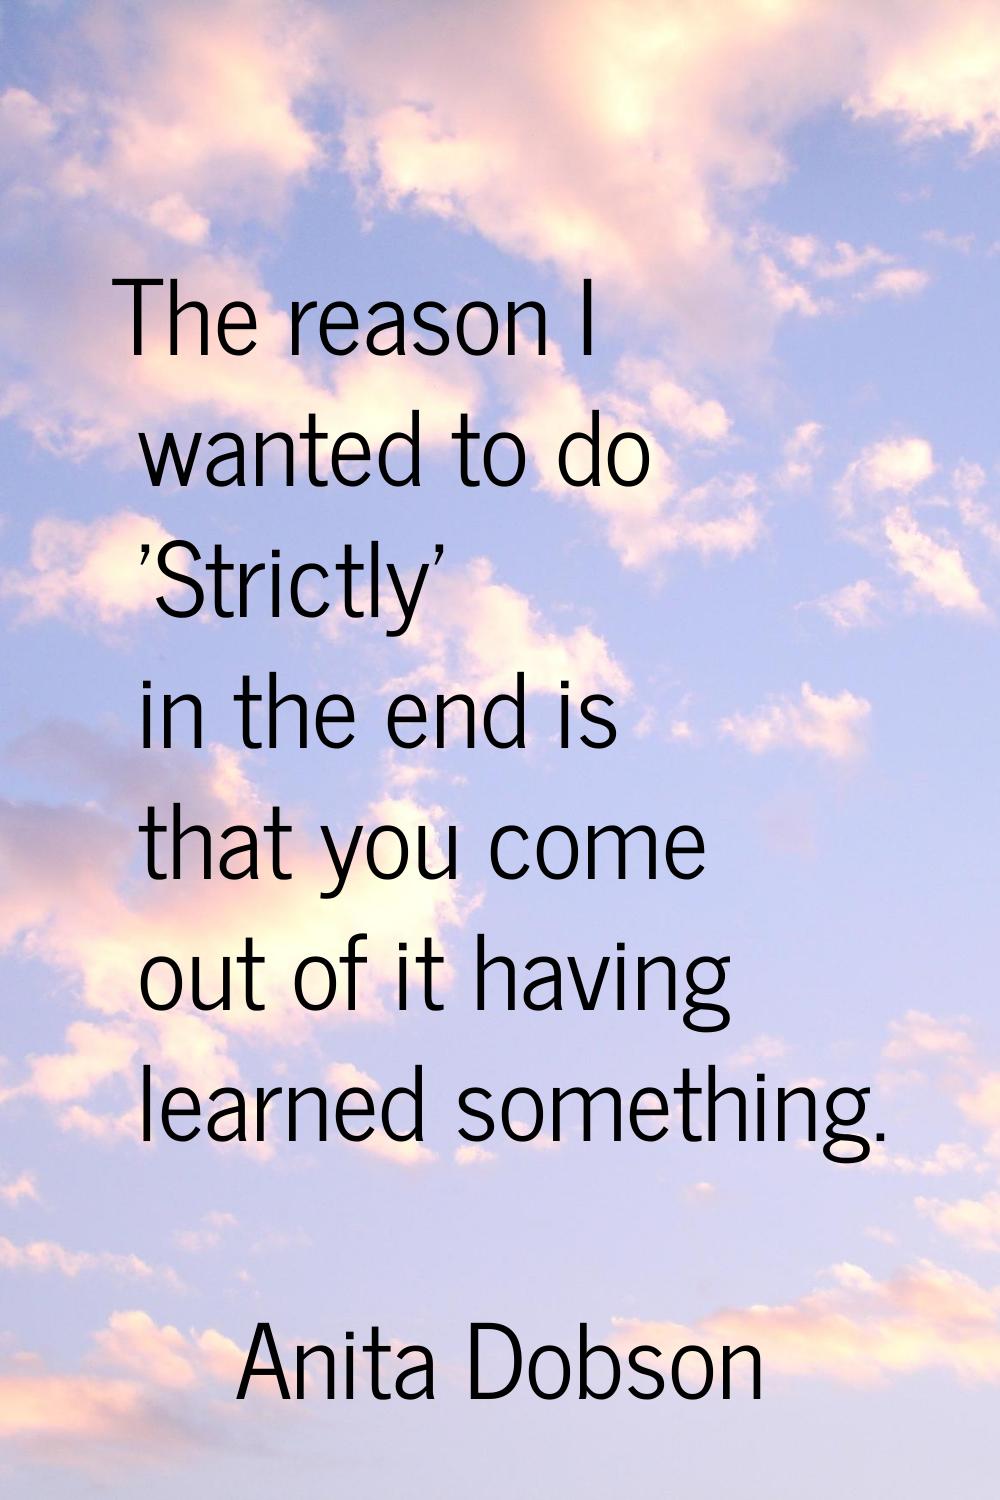 The reason I wanted to do 'Strictly' in the end is that you come out of it having learned something